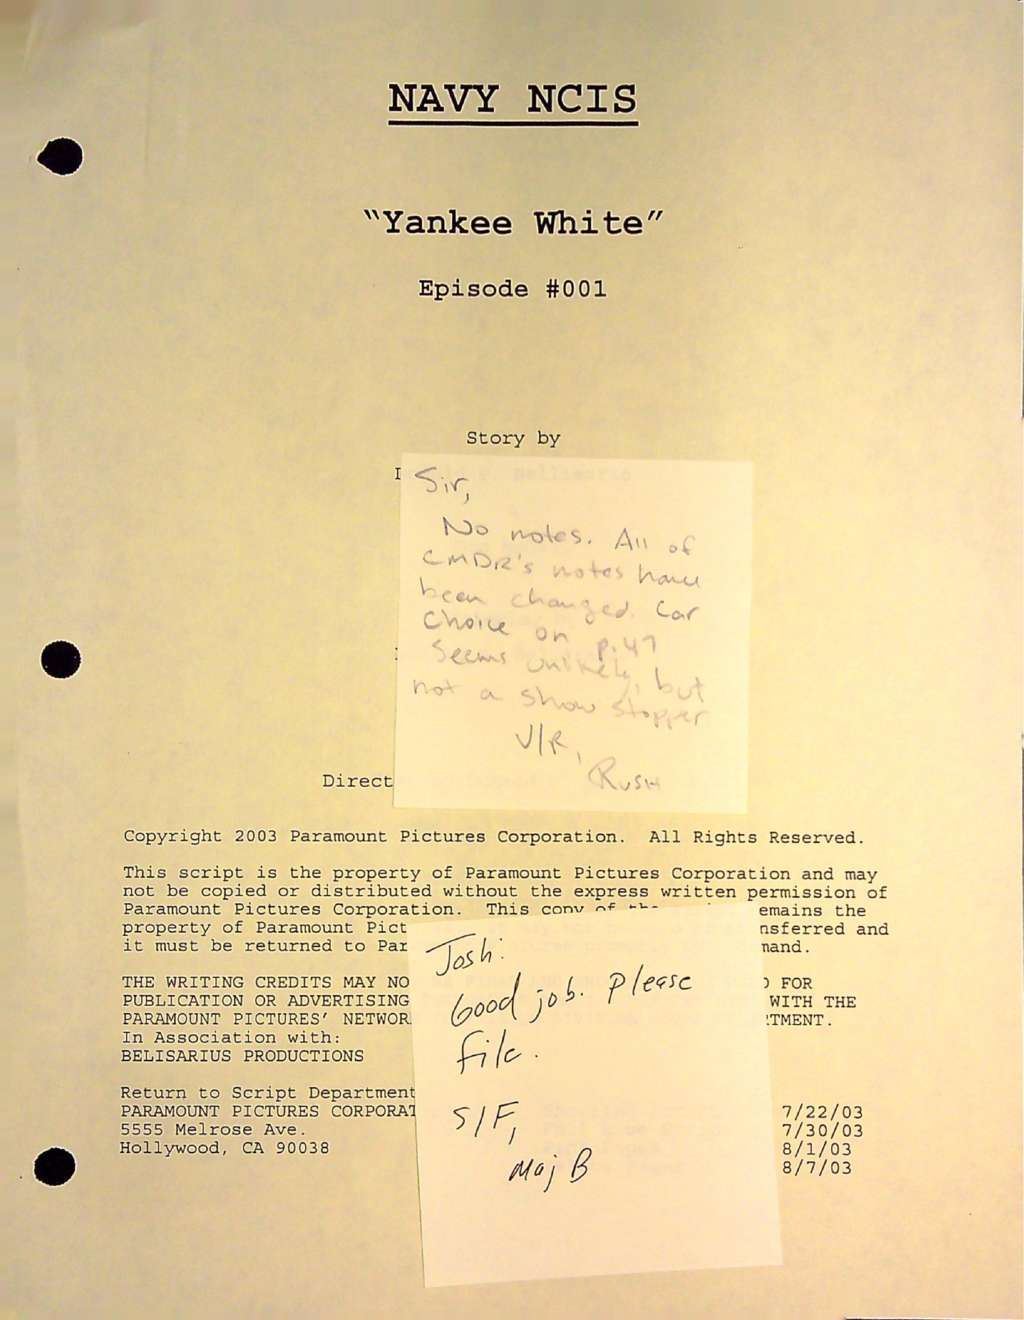 Script for episode 001 of NCIS, reviewed by the Marines' Hollywood office